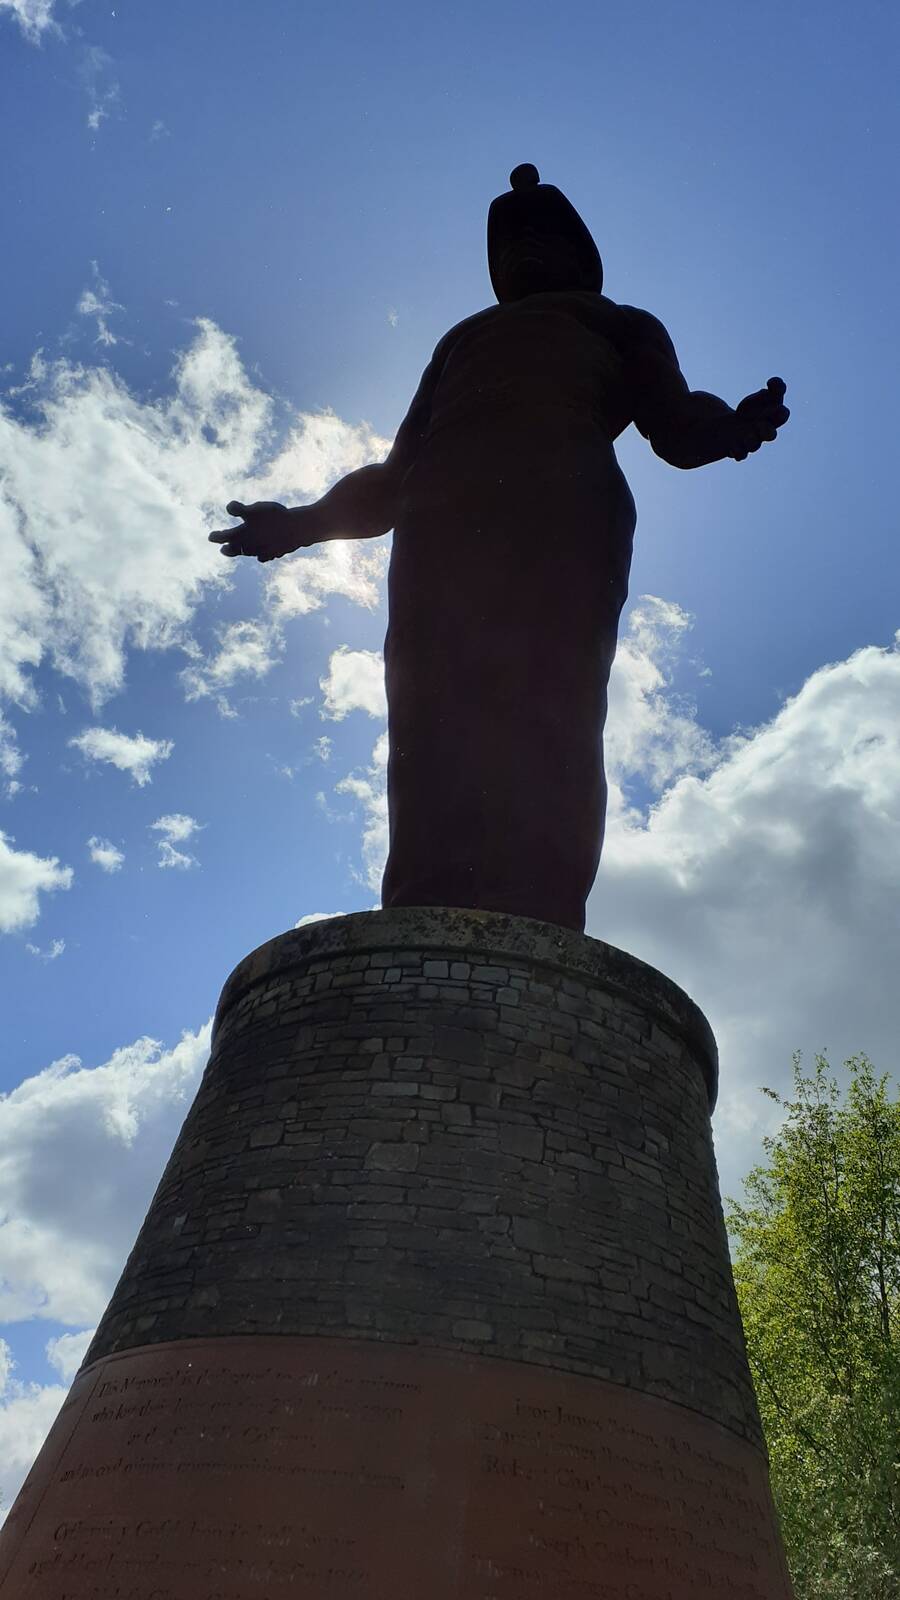 Image of The Guardian of The Valleys, Six Bells by Duncan Mark Wilmot